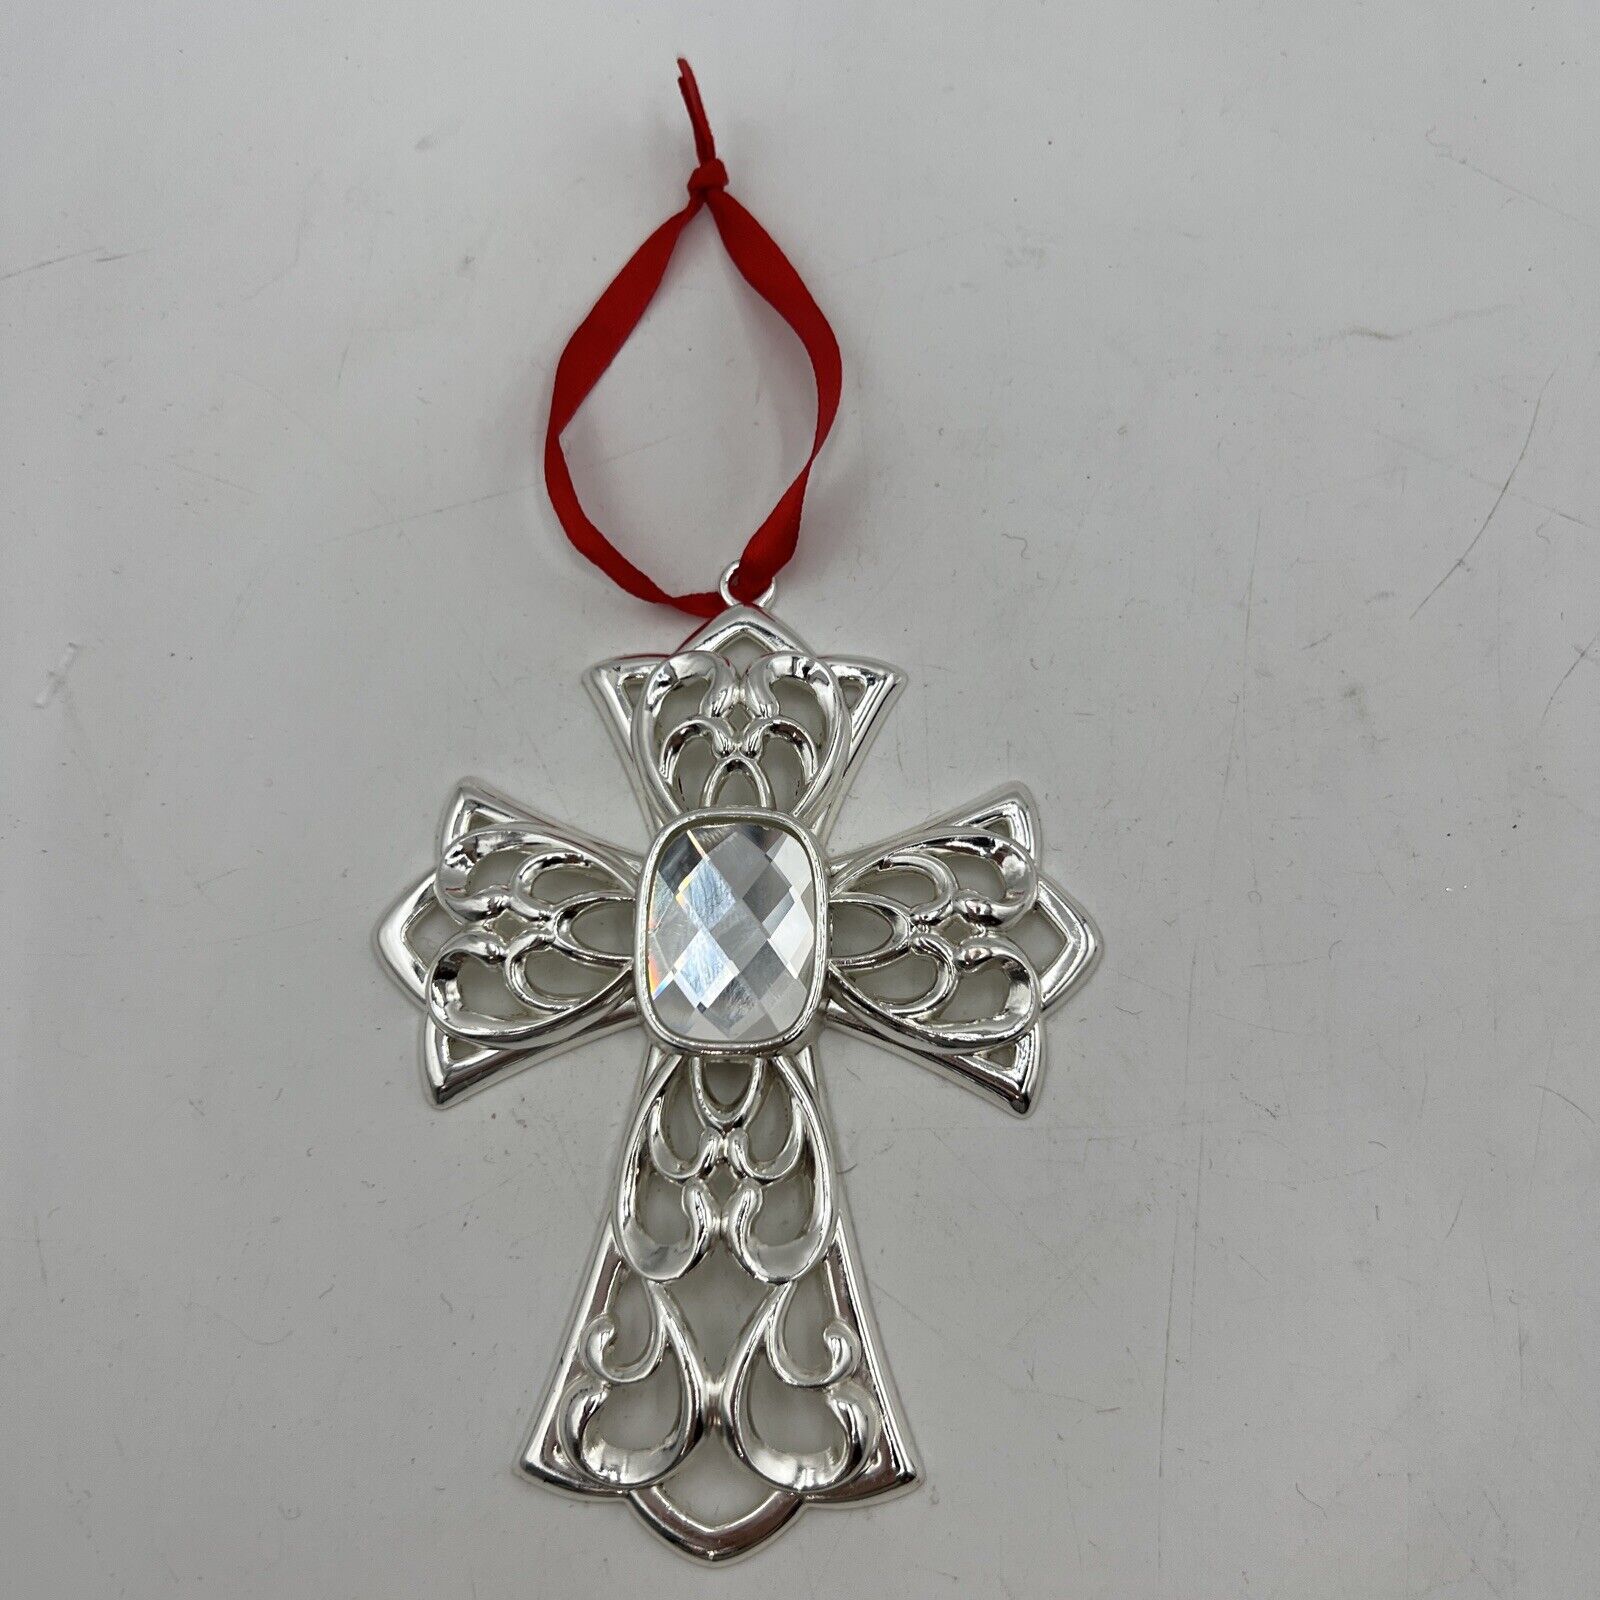 Lenox Bejeweled Silver Plate CROSS with Crystal Jewel ~ Ornament